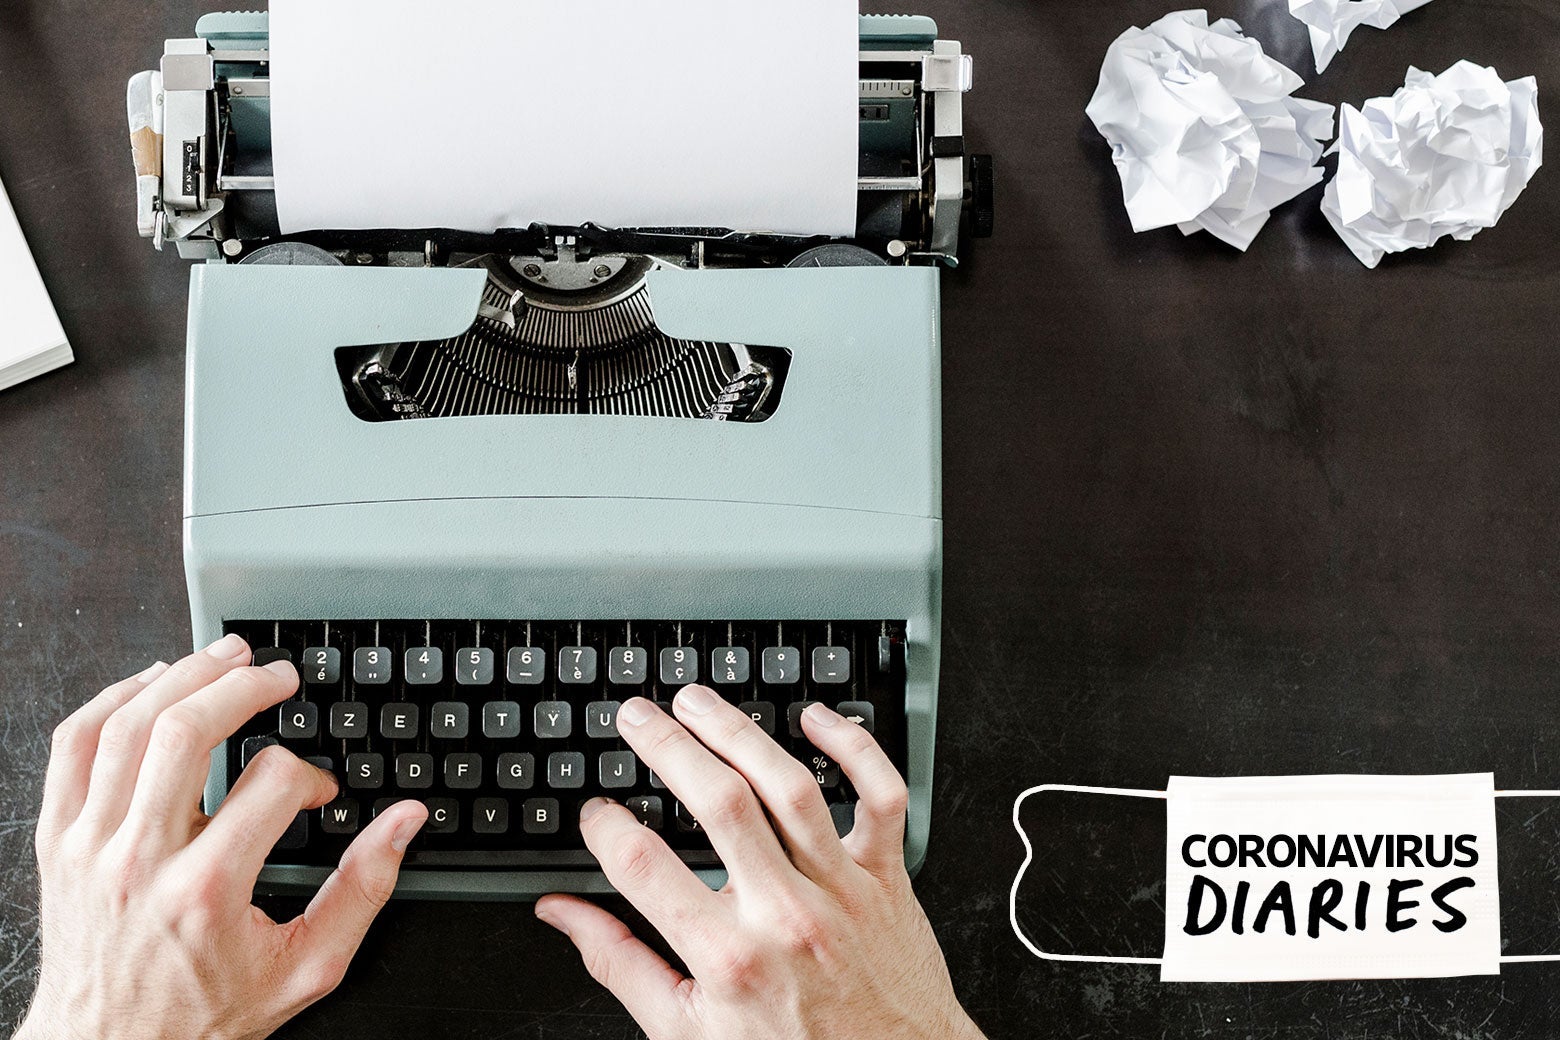 Hands typing on a typewriter next to balled-up papers and a surgical mask that says "Coronavirus Diaries"